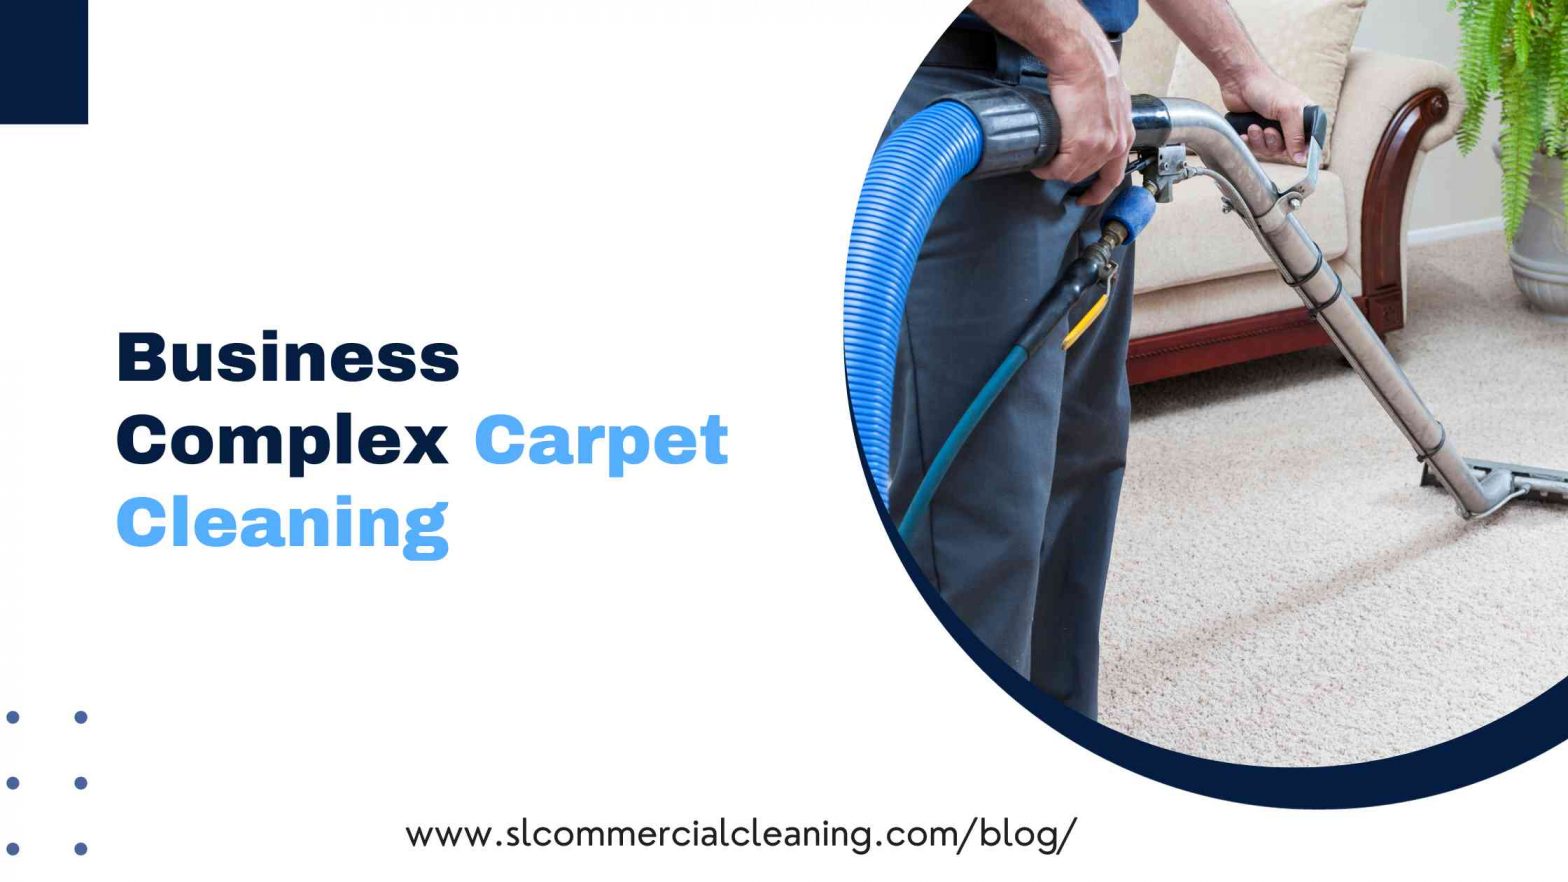 Business Complex Carpet Cleaning